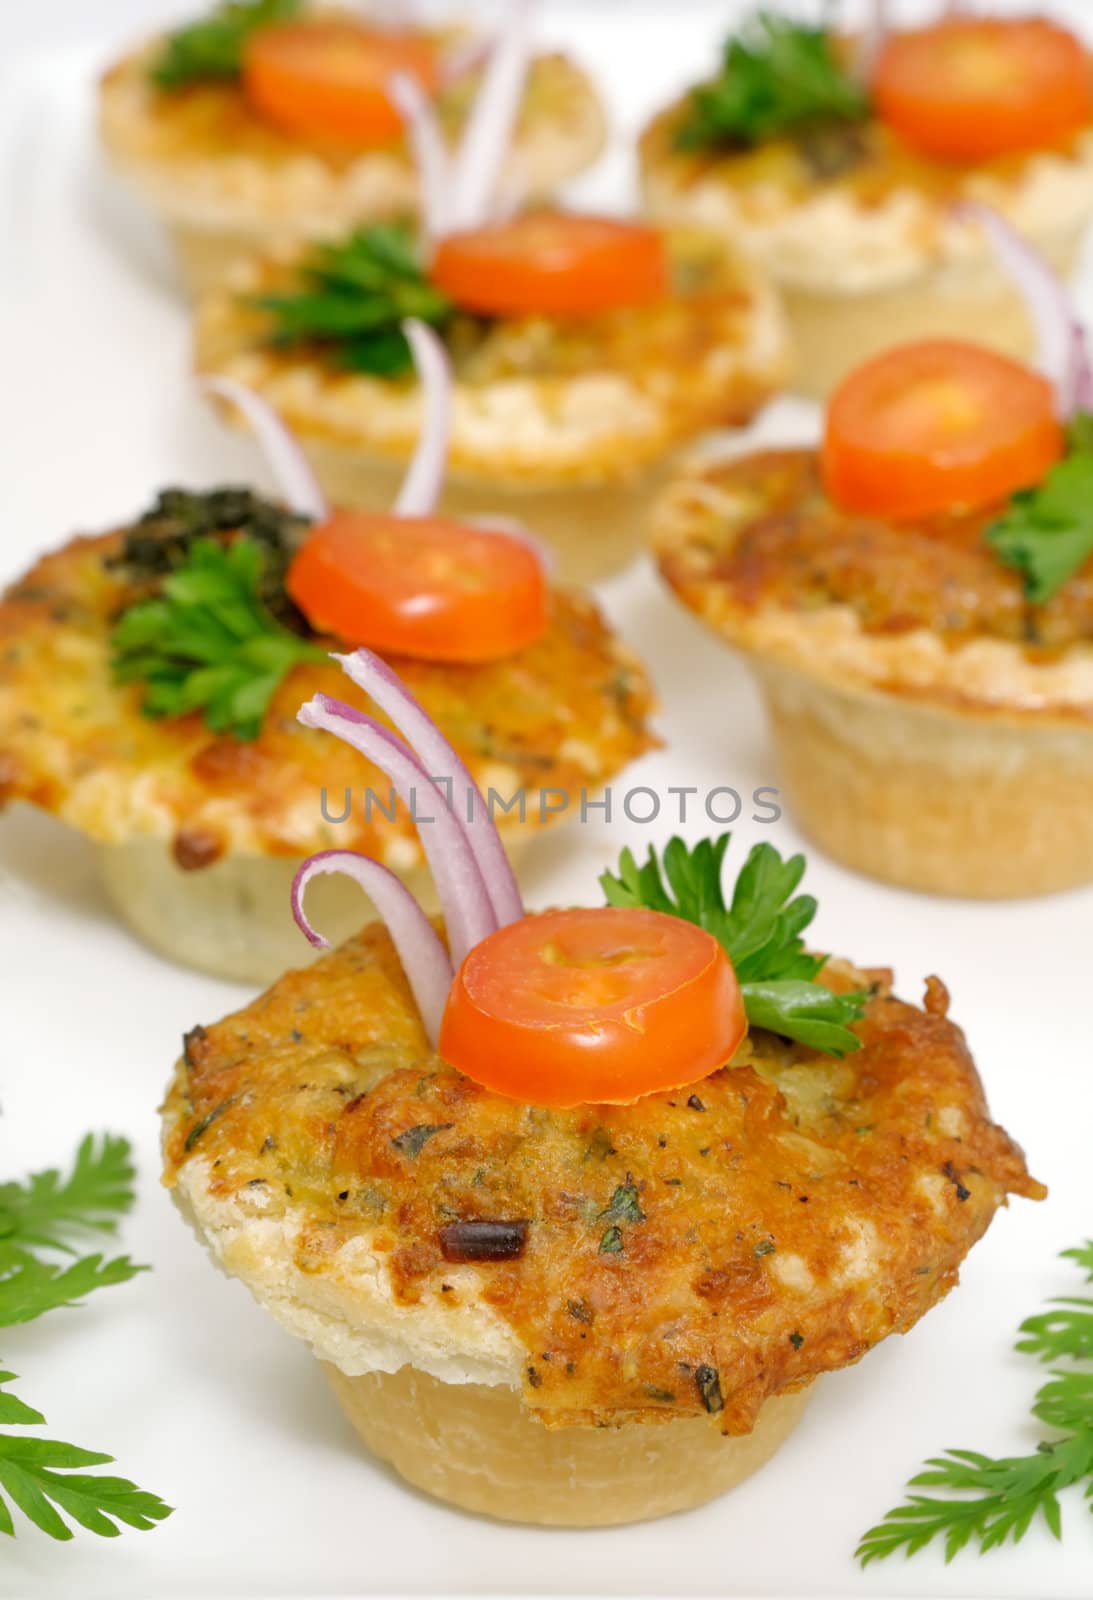 Several vegetable small quiches decorated with onion, tomato slice and parsley